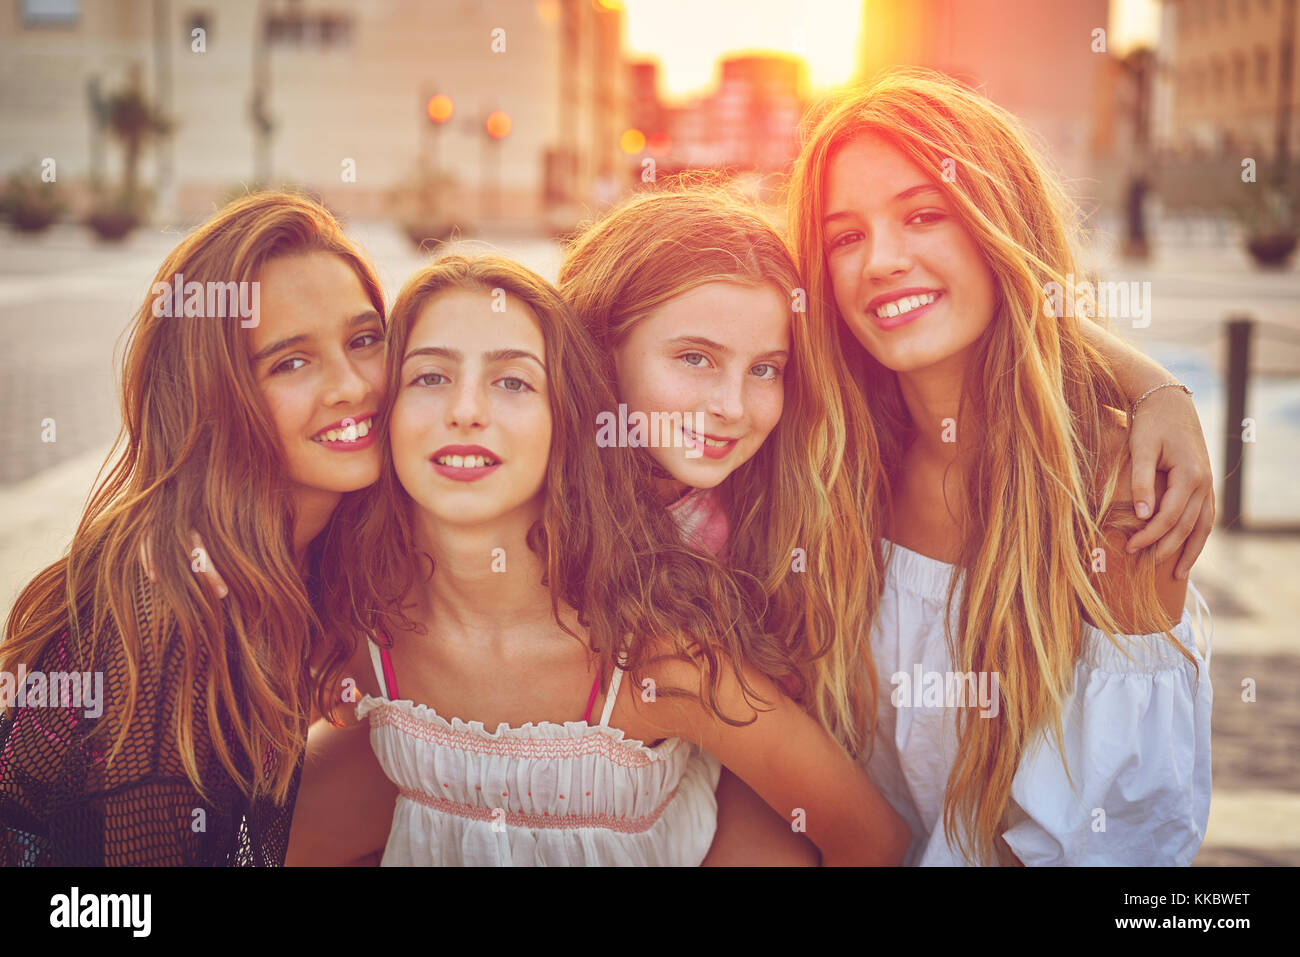 Best friends teen girls at sunset in the city filtered image Stock Photo